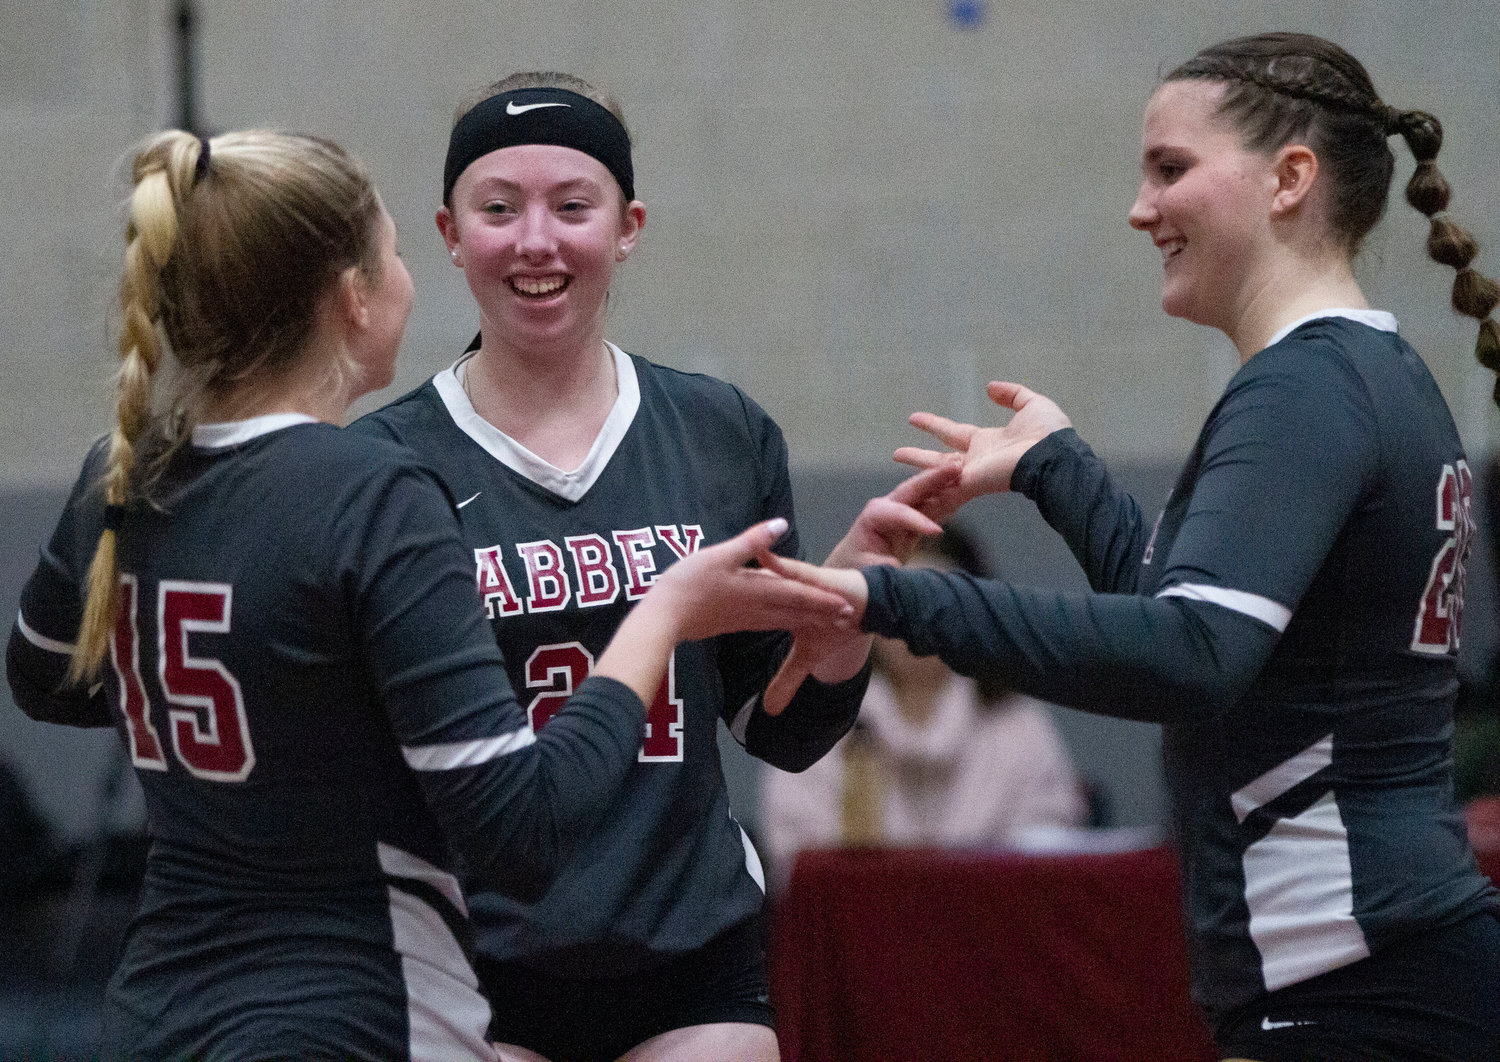 Dakota Ormiston, Bailey Howell and Grace Connaughton (from left) celebrate after a point.